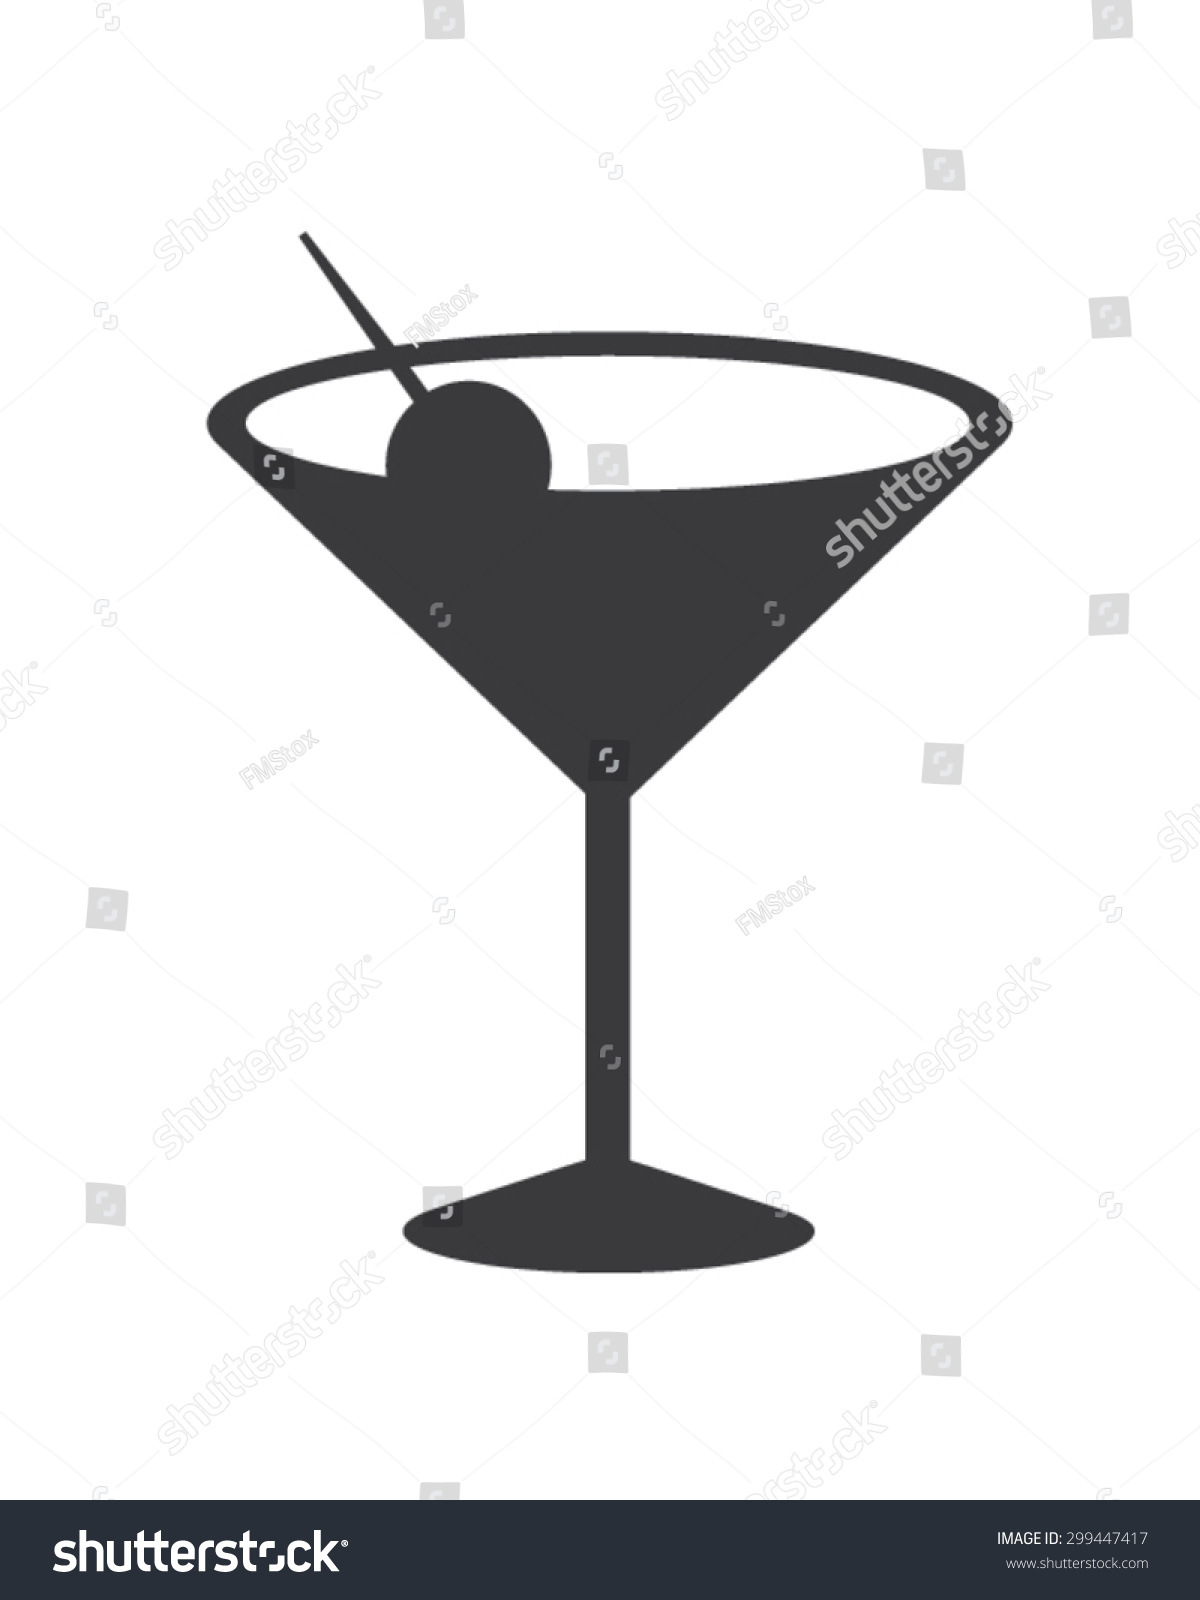 Vector Cocktail Glass Silhouette Stock Vector 299447417 ...